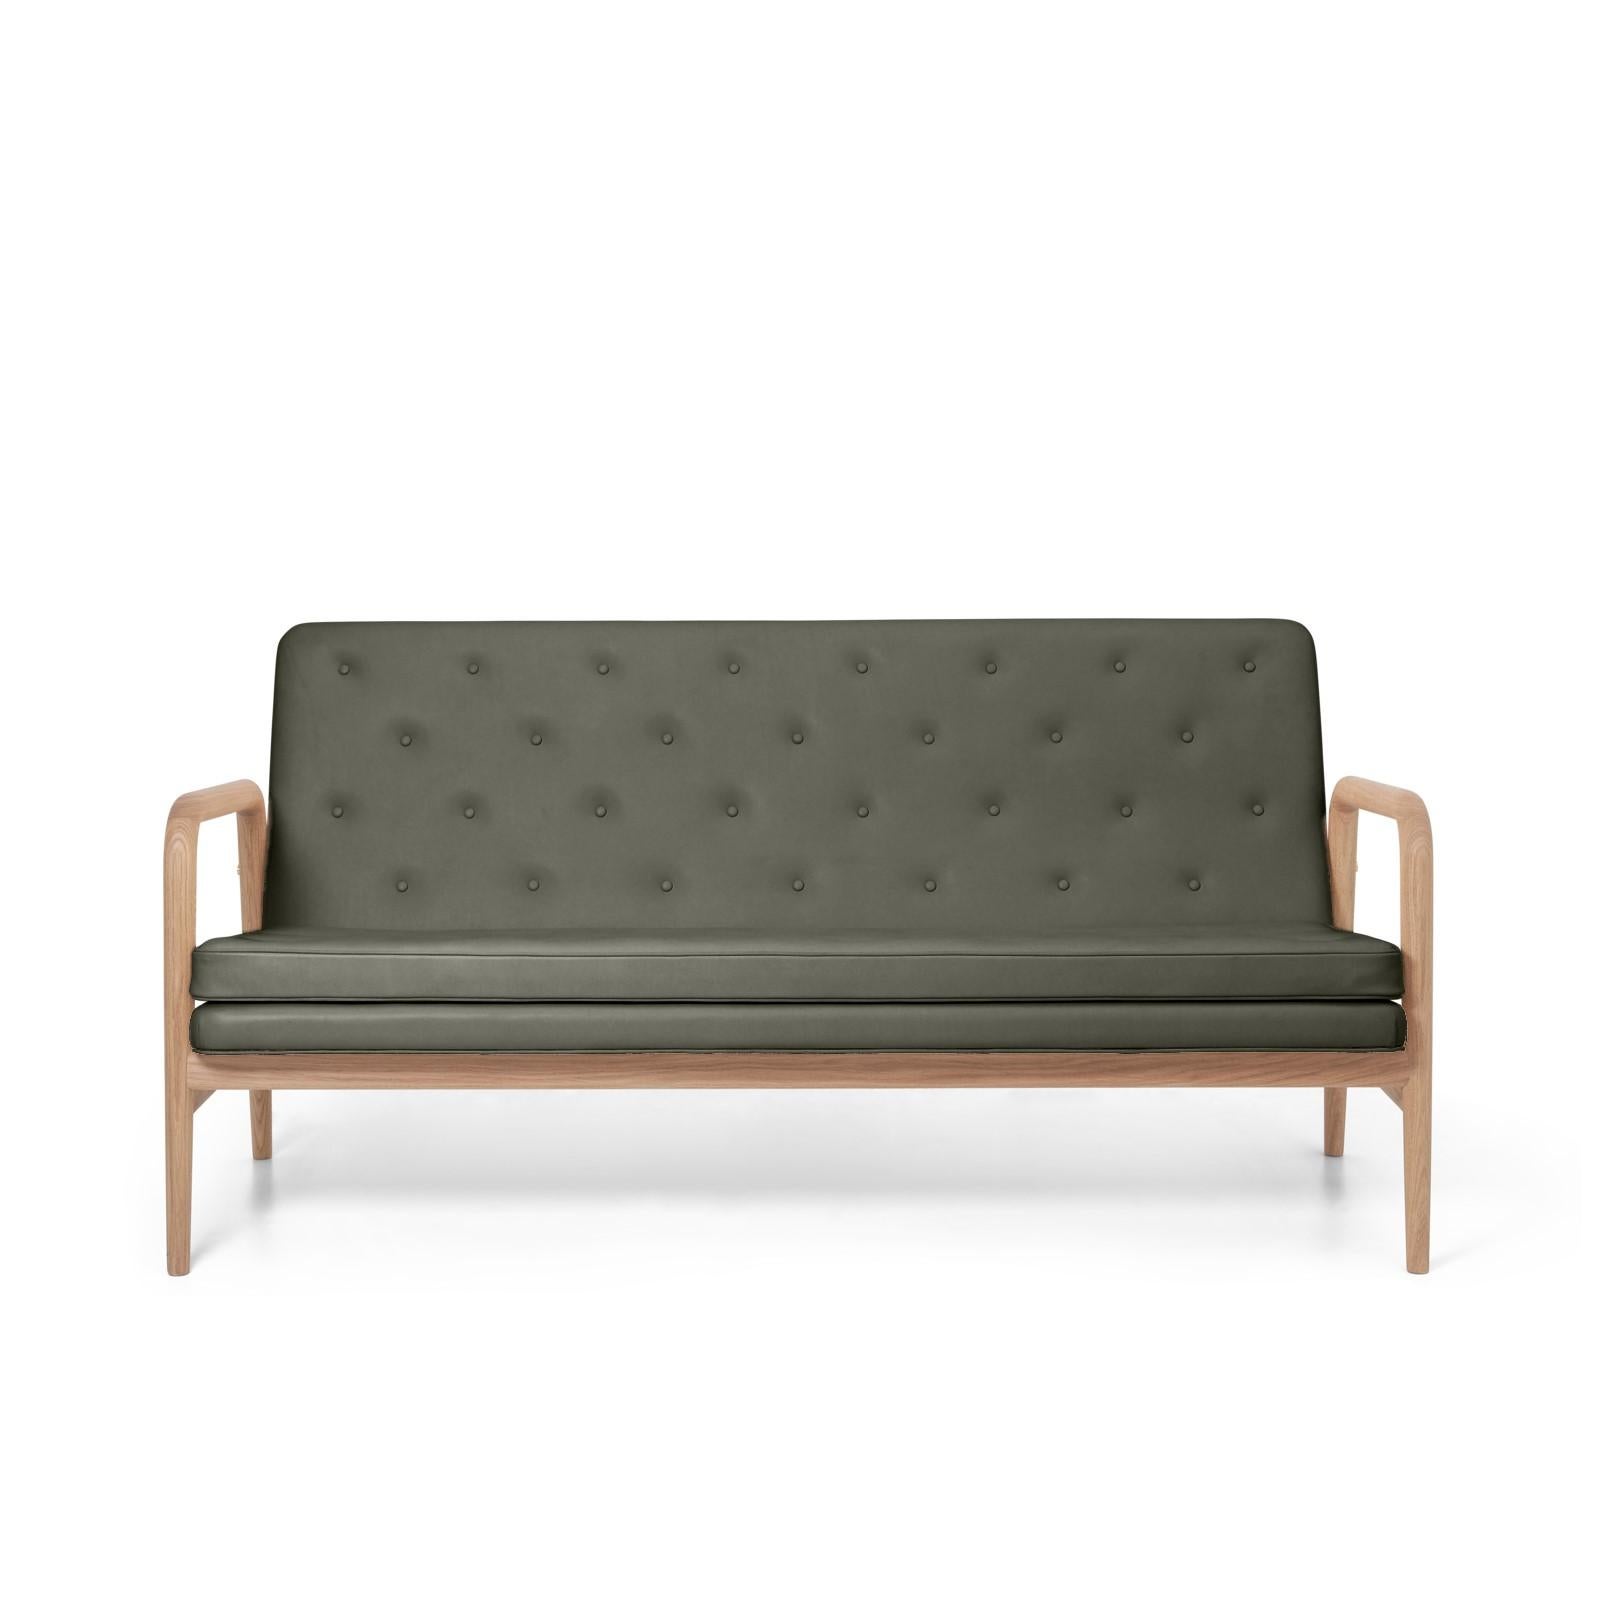 Carl Hansen Foyer Series Sofa in Edelman's Helm Leather by Ilse Crawford For Sale